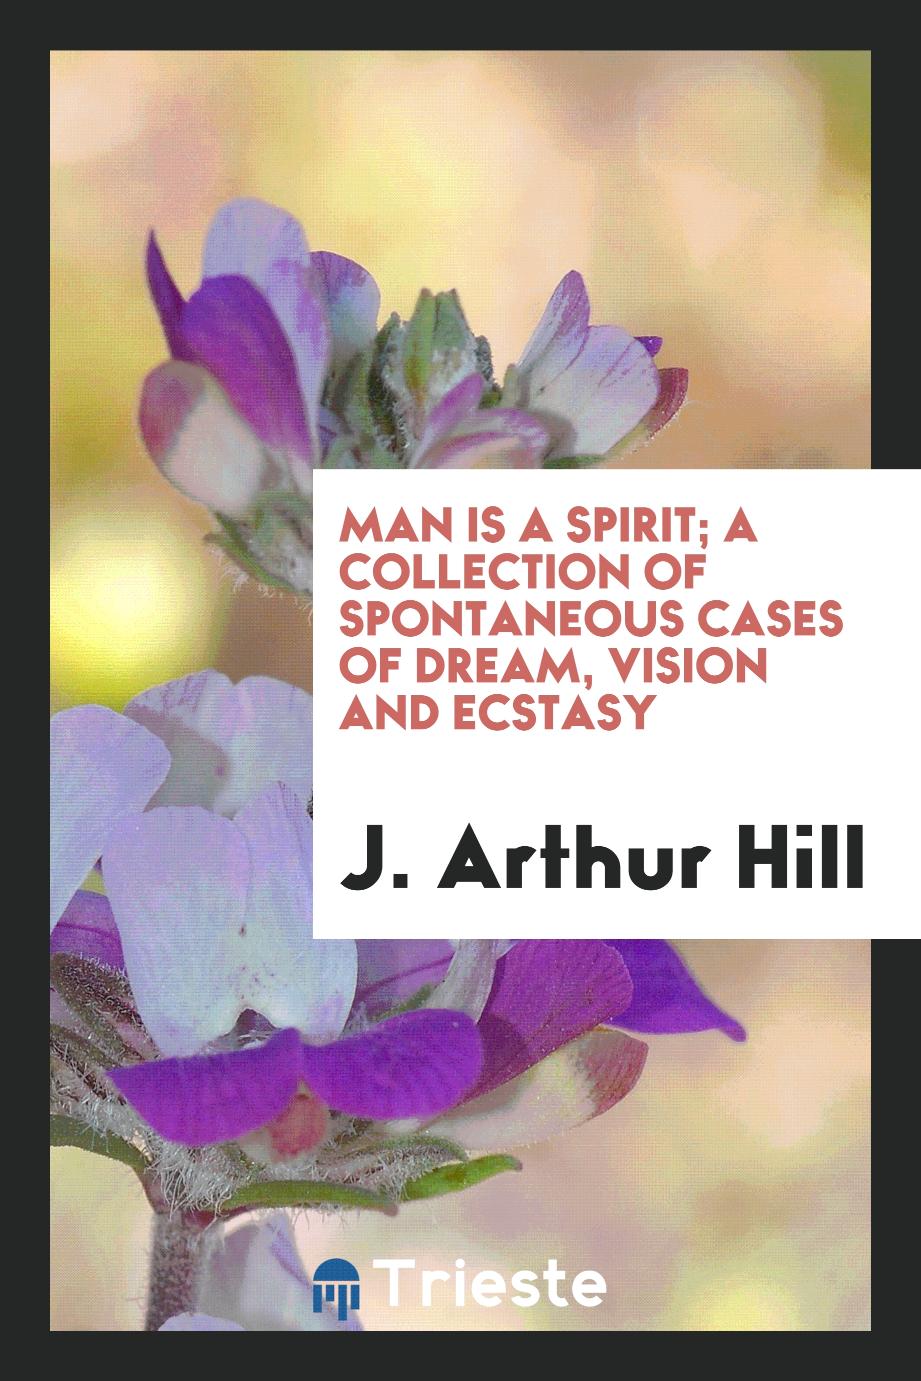 Man is a spirit; a collection of spontaneous cases of dream, vision and ecstasy